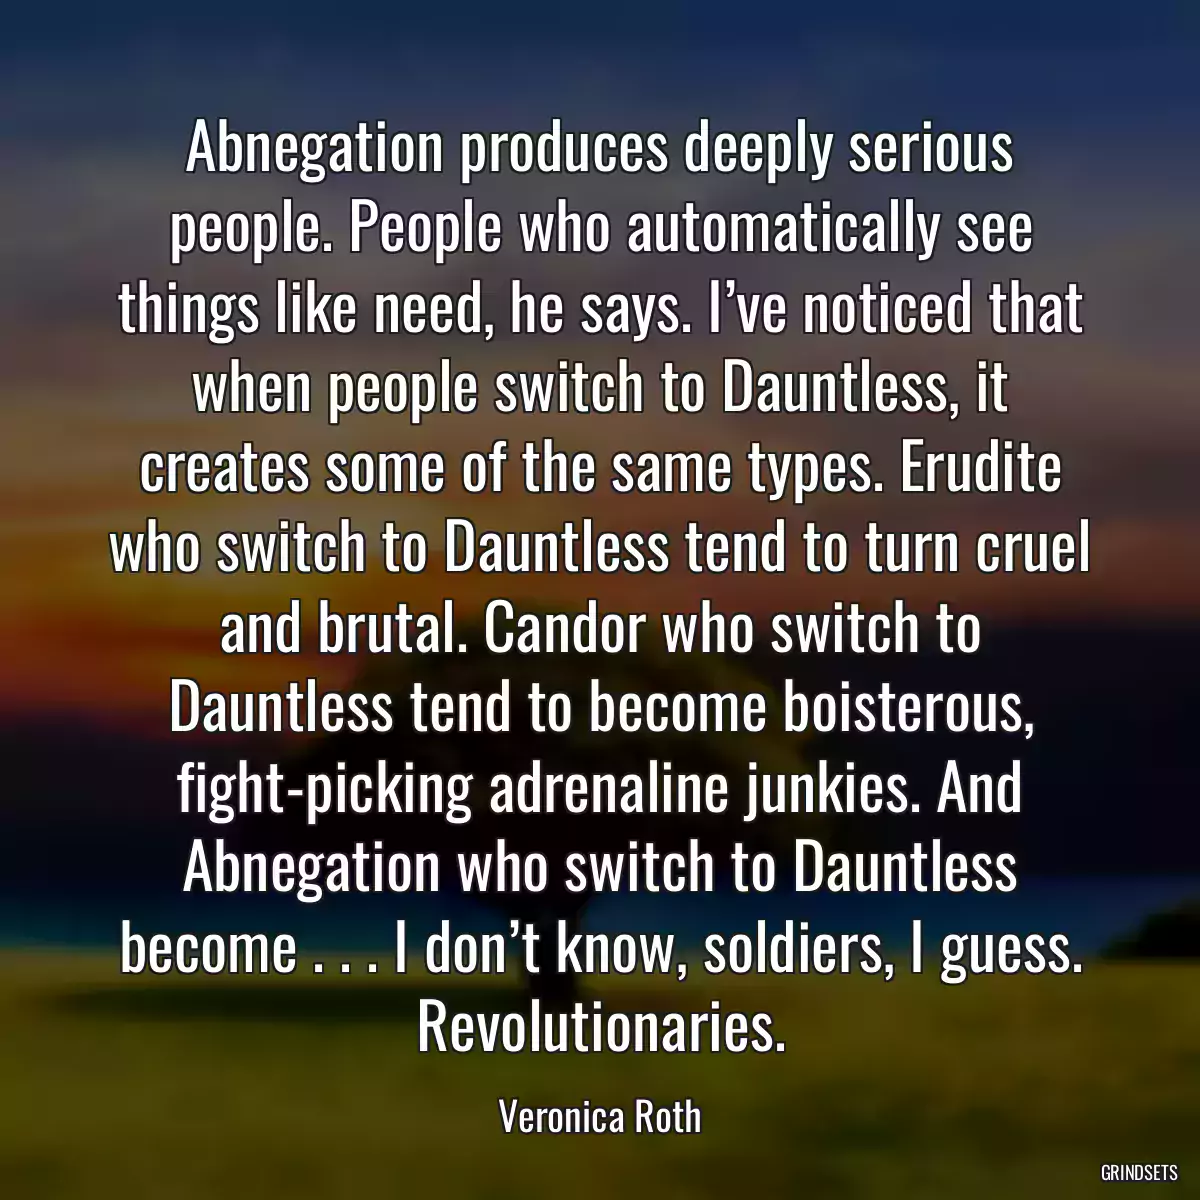 Abnegation produces deeply serious people. People who automatically see things like need, he says. I’ve noticed that when people switch to Dauntless, it creates some of the same types. Erudite who switch to Dauntless tend to turn cruel and brutal. Candor who switch to Dauntless tend to become boisterous, fight-picking adrenaline junkies. And Abnegation who switch to Dauntless become . . . I don’t know, soldiers, I guess. Revolutionaries.